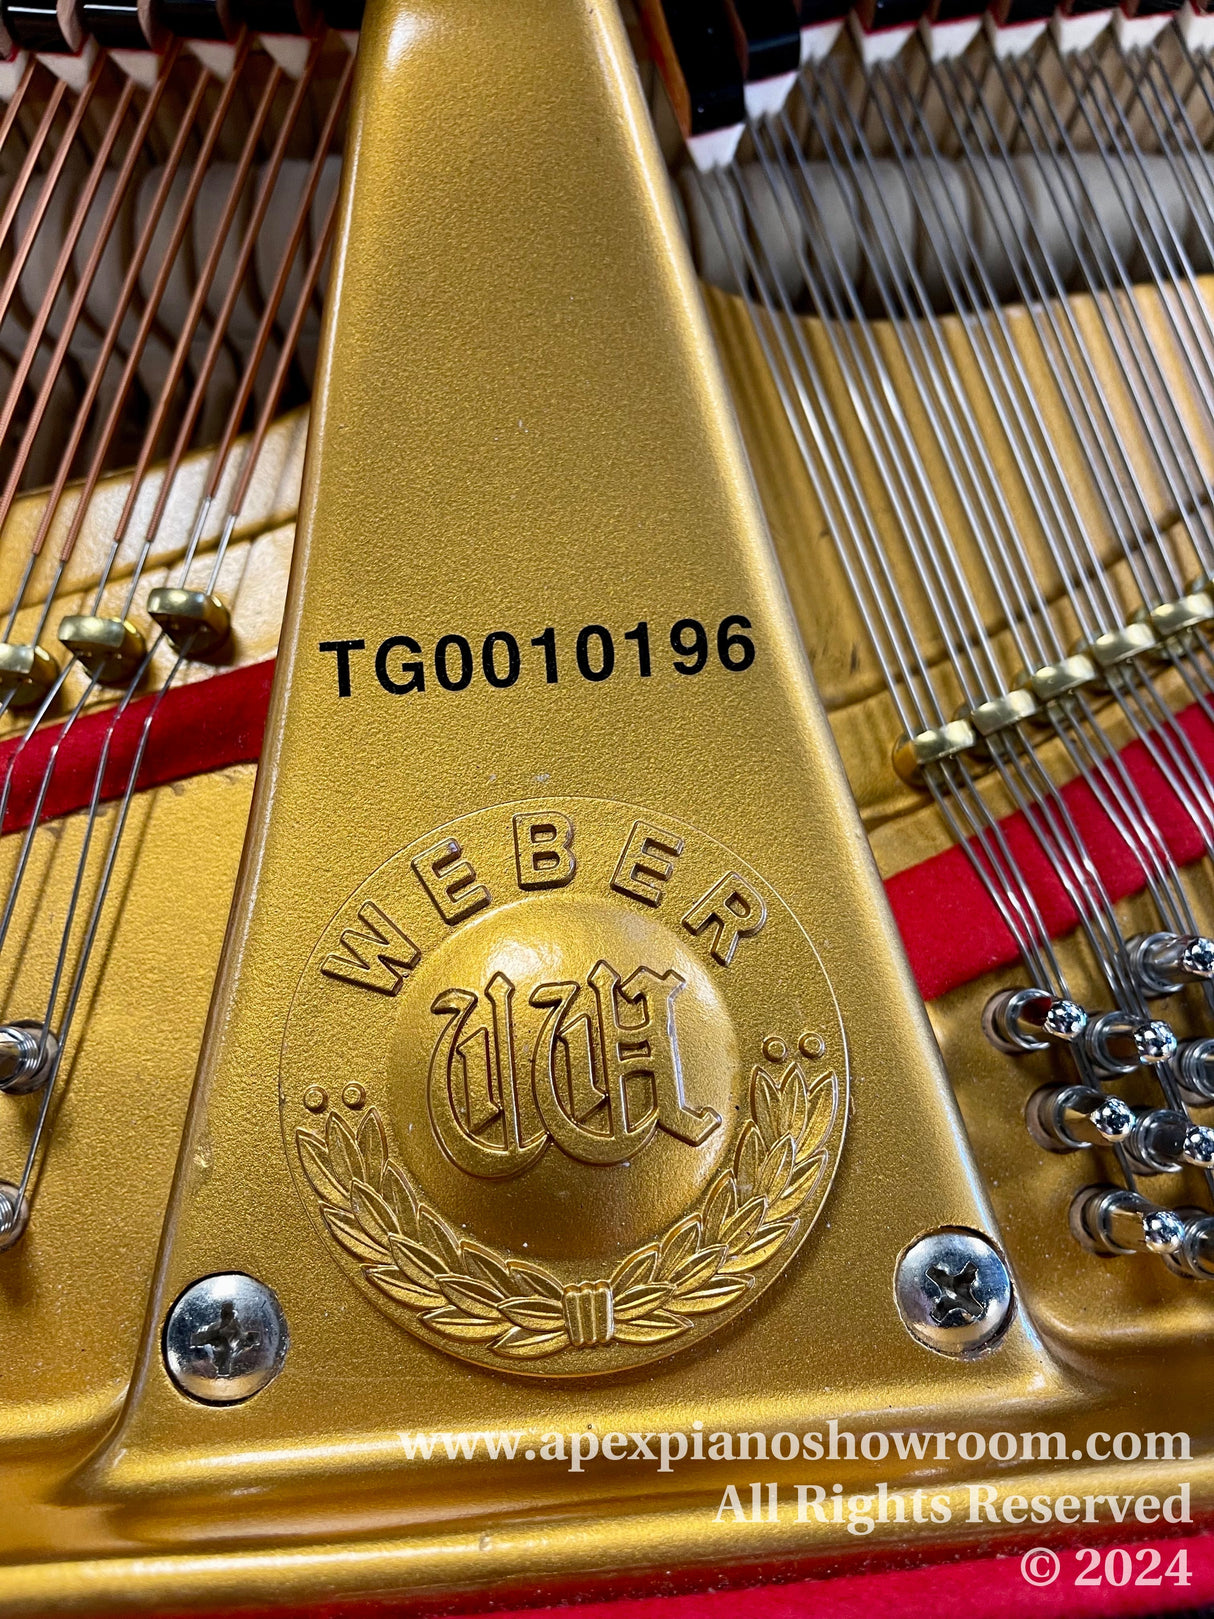 A close-up view of the gold-painted iron frame inside a Weber piano, featuring the brands emblem and model number TG0010196.